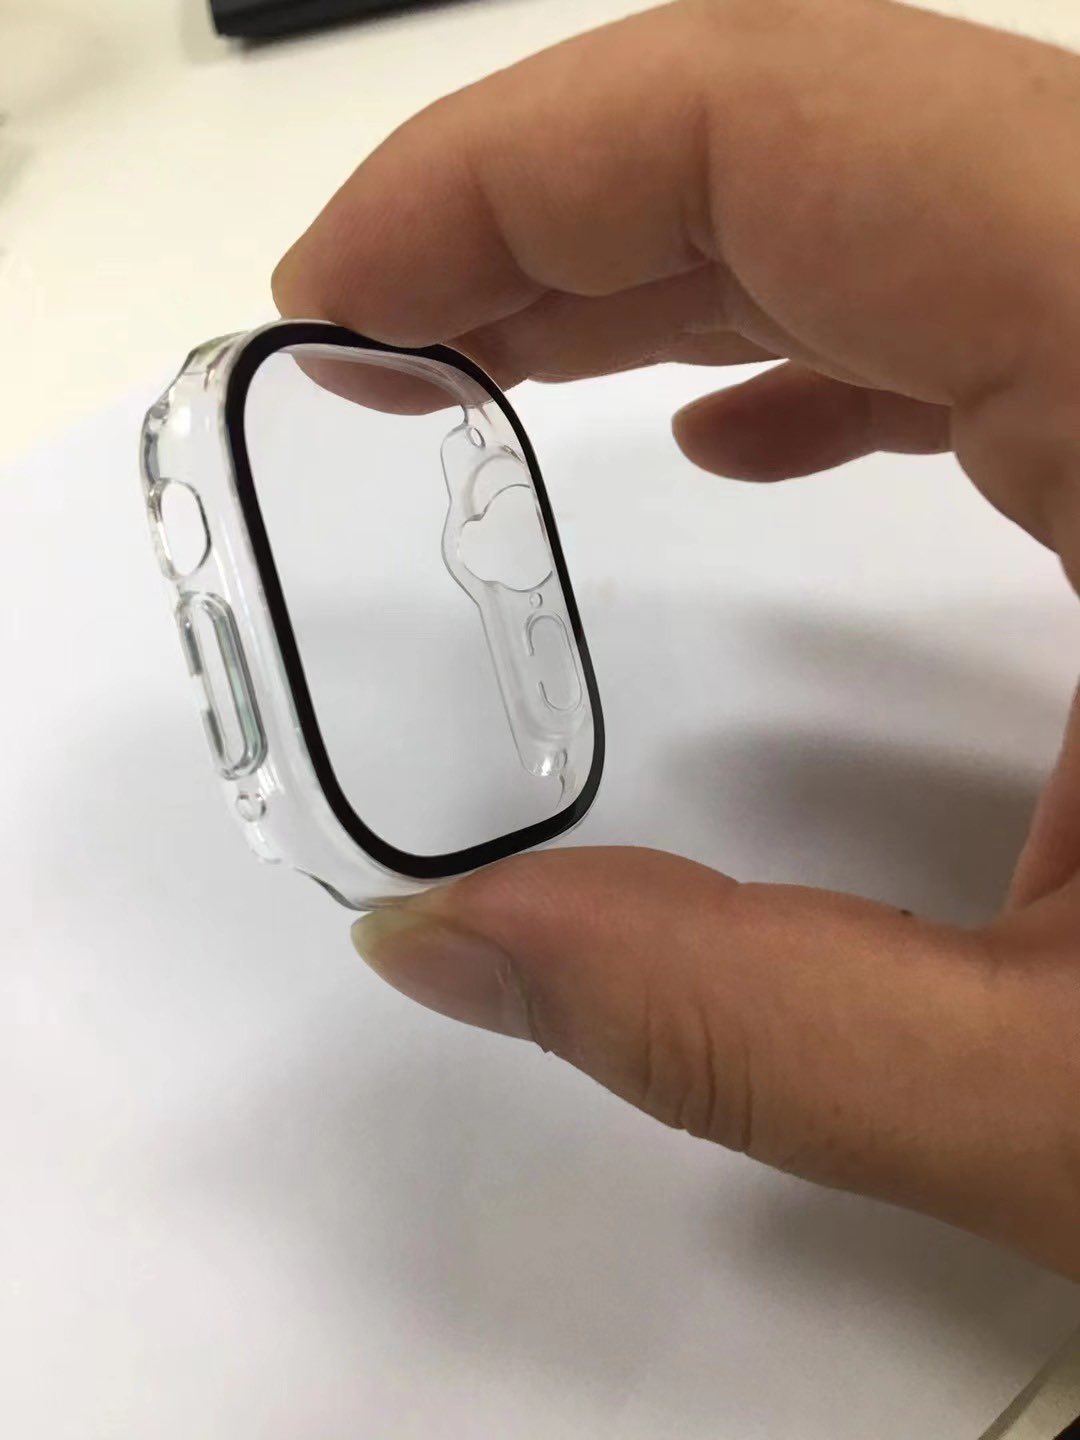 Case Images Allegedly Reveal Size Difference Between Apple Watch Pro and Apple Watch Series 8